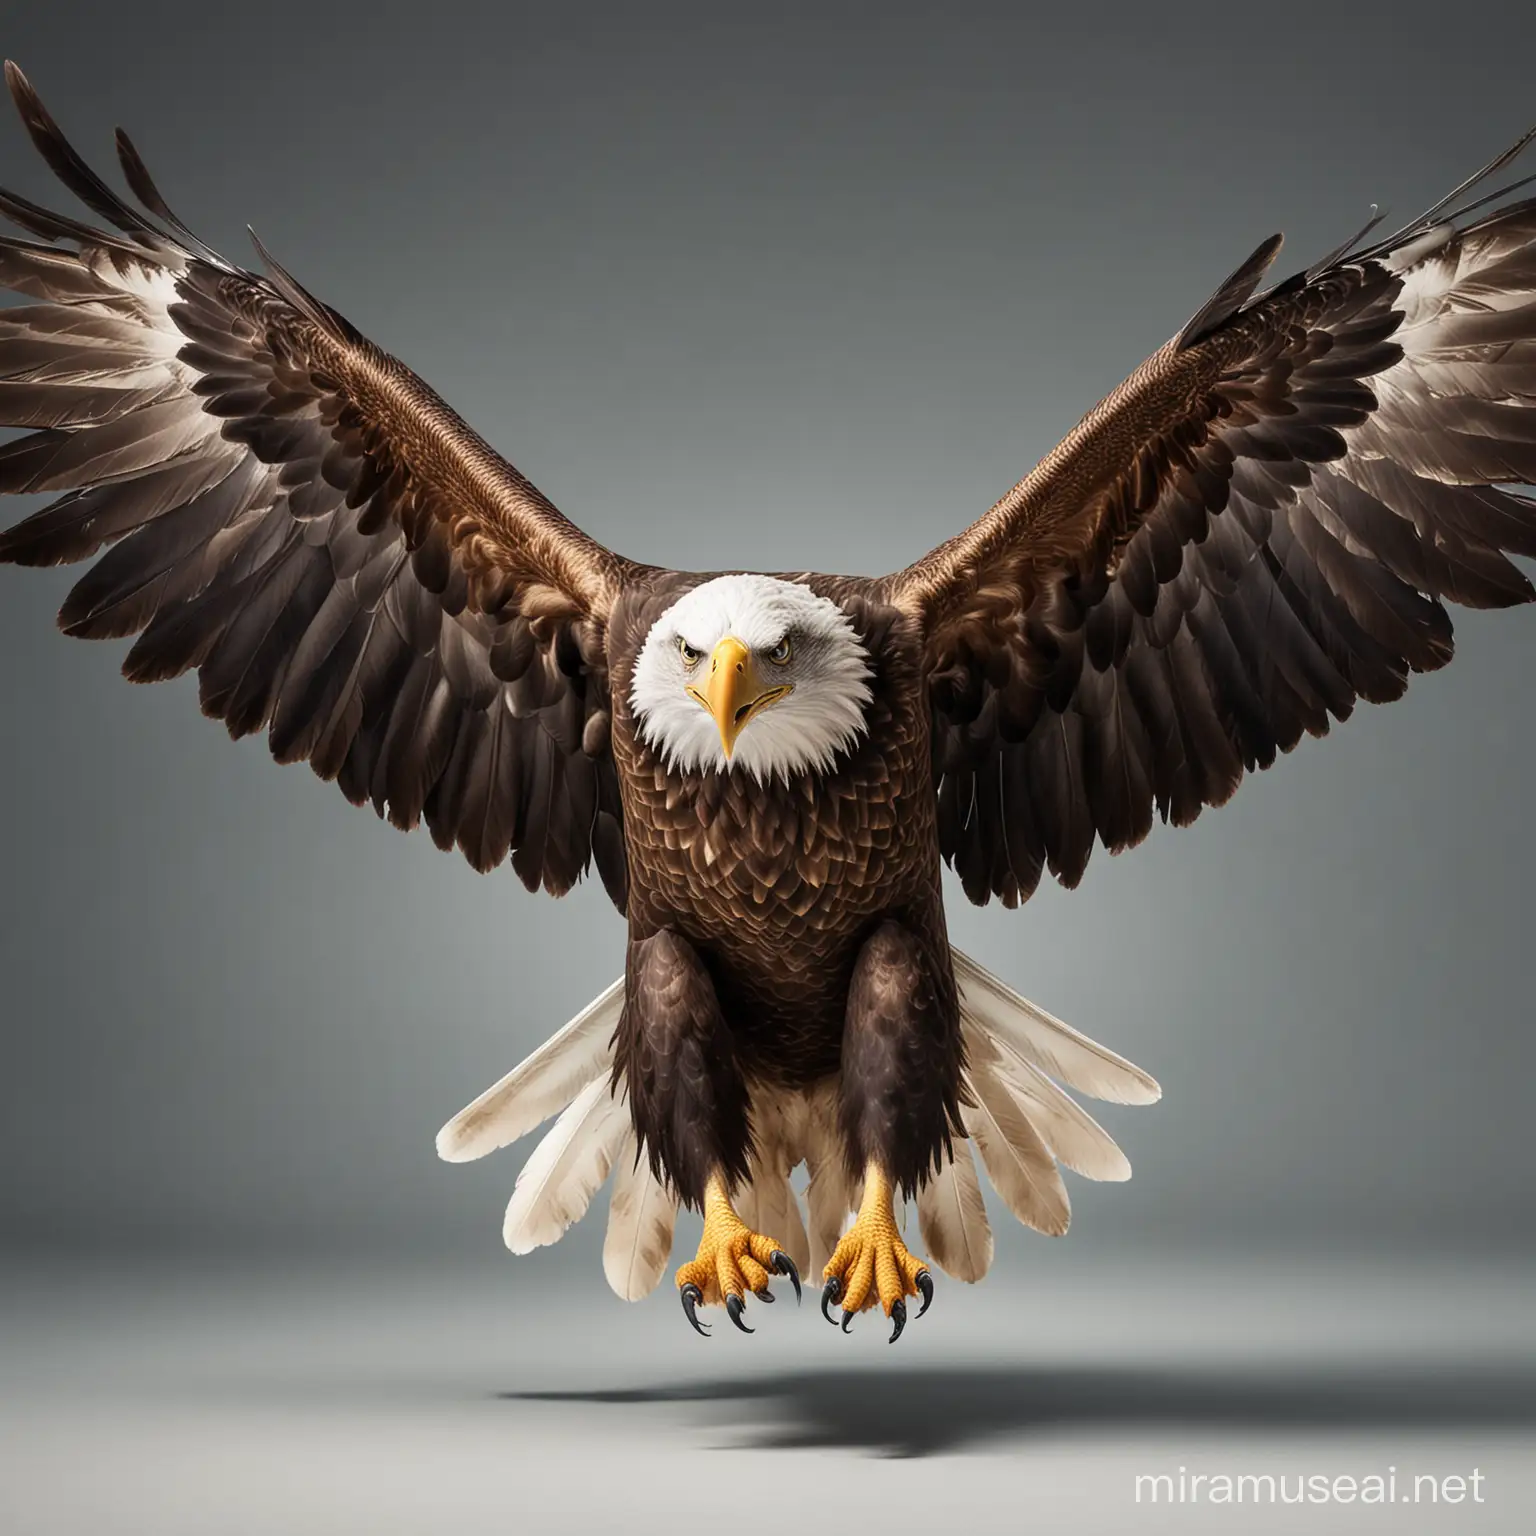 Majestic Eagle Soaring with Wings Spread Wide